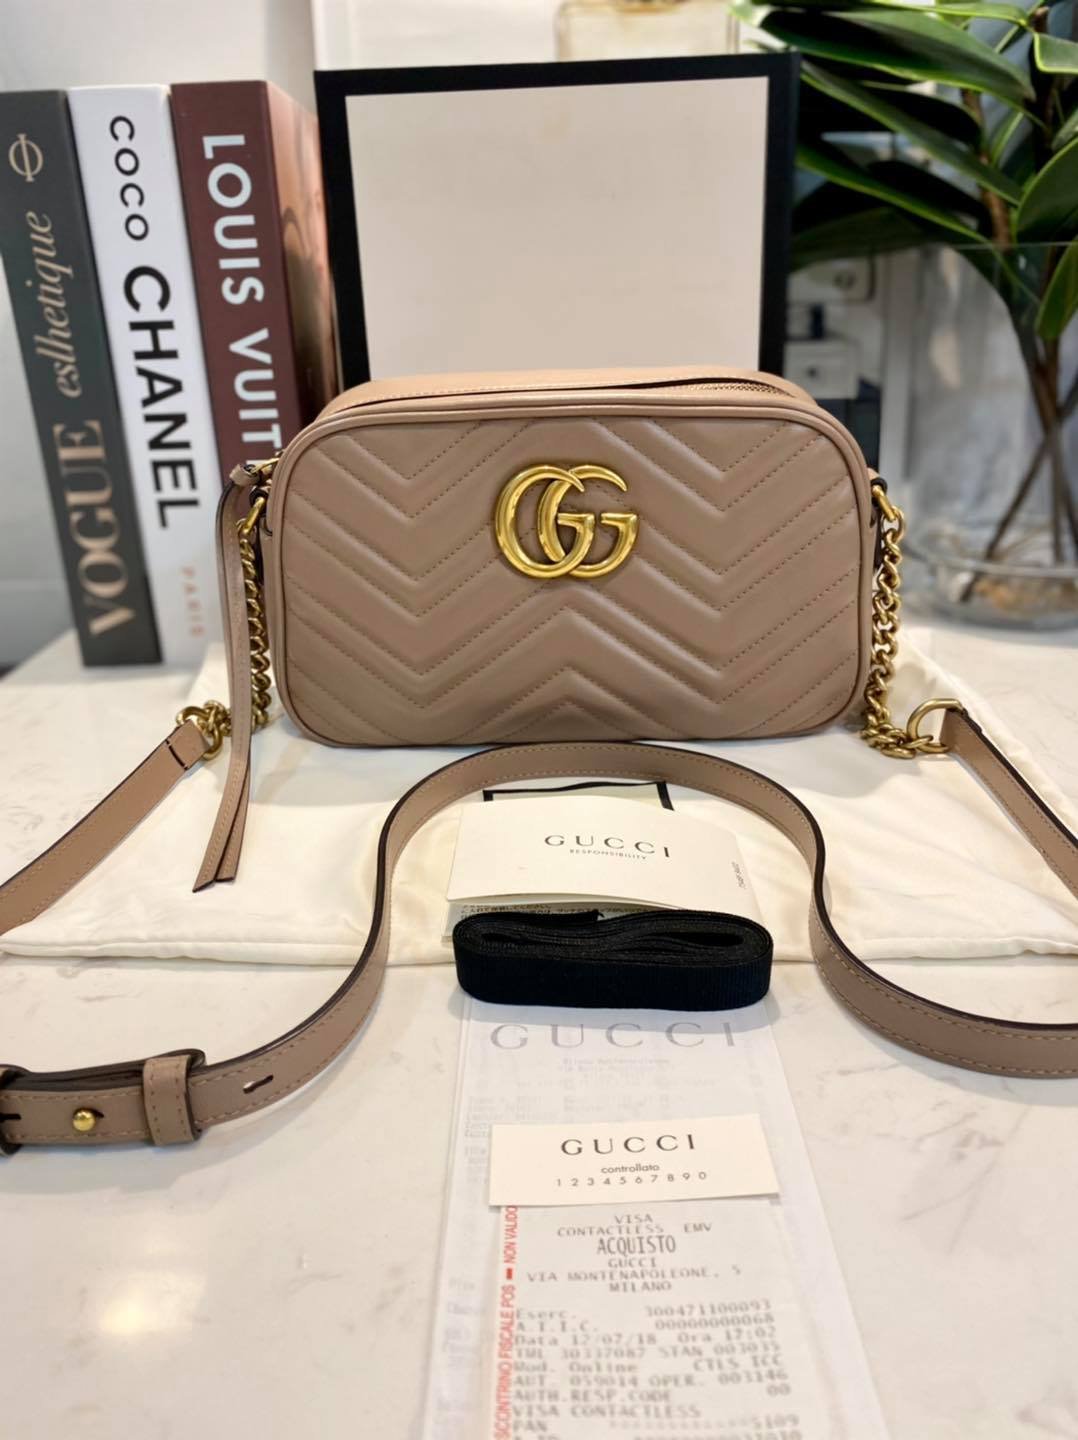 Adjustable Gucci Sling Bag For Office, Size: H-7inch,W-10inch